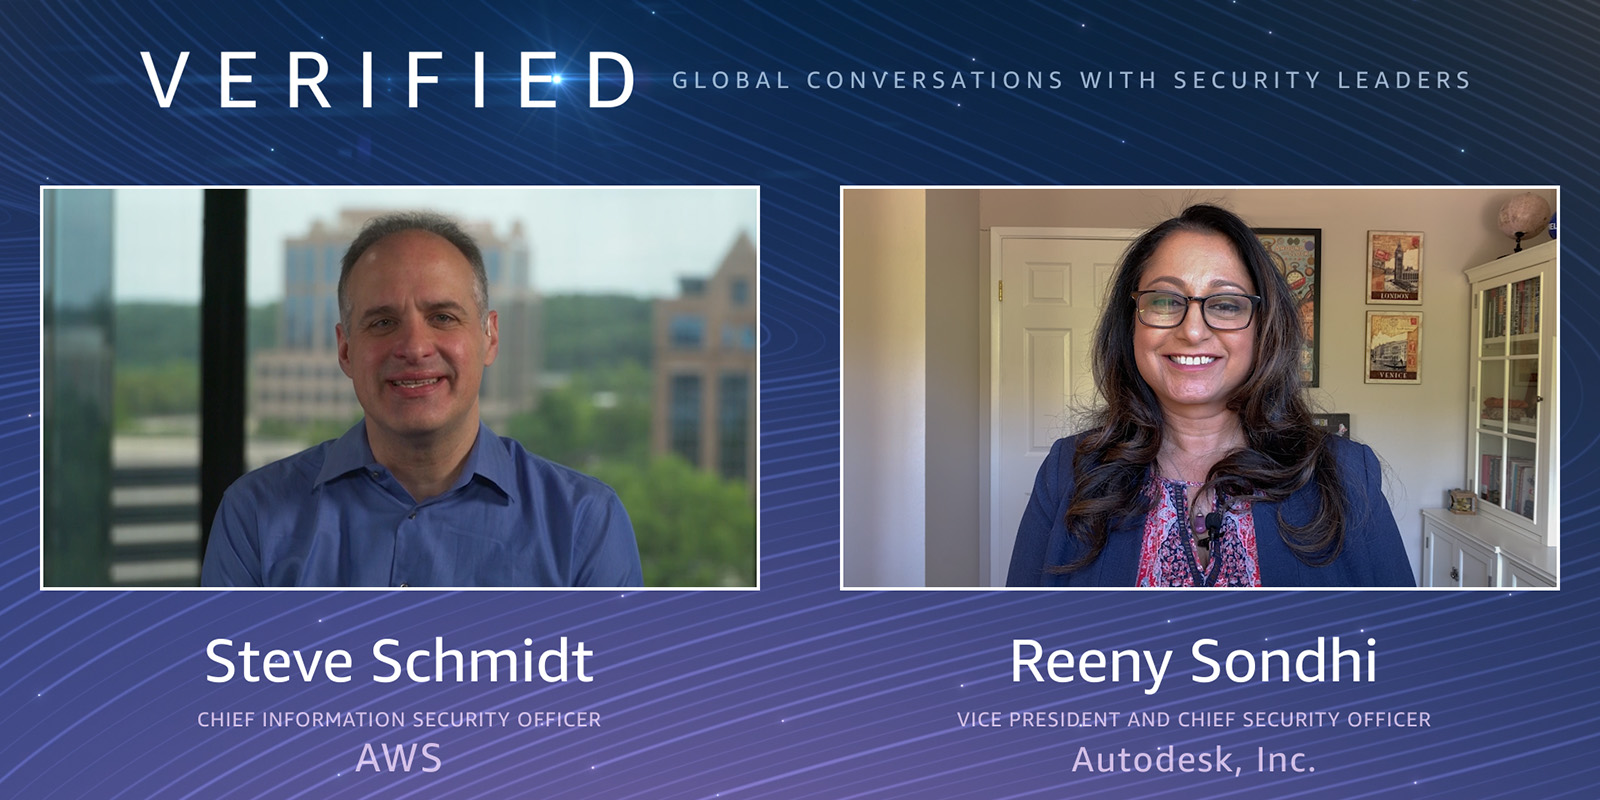 AWS Verified episode 6: A discussion with Reeny Sondhi of Autodesk